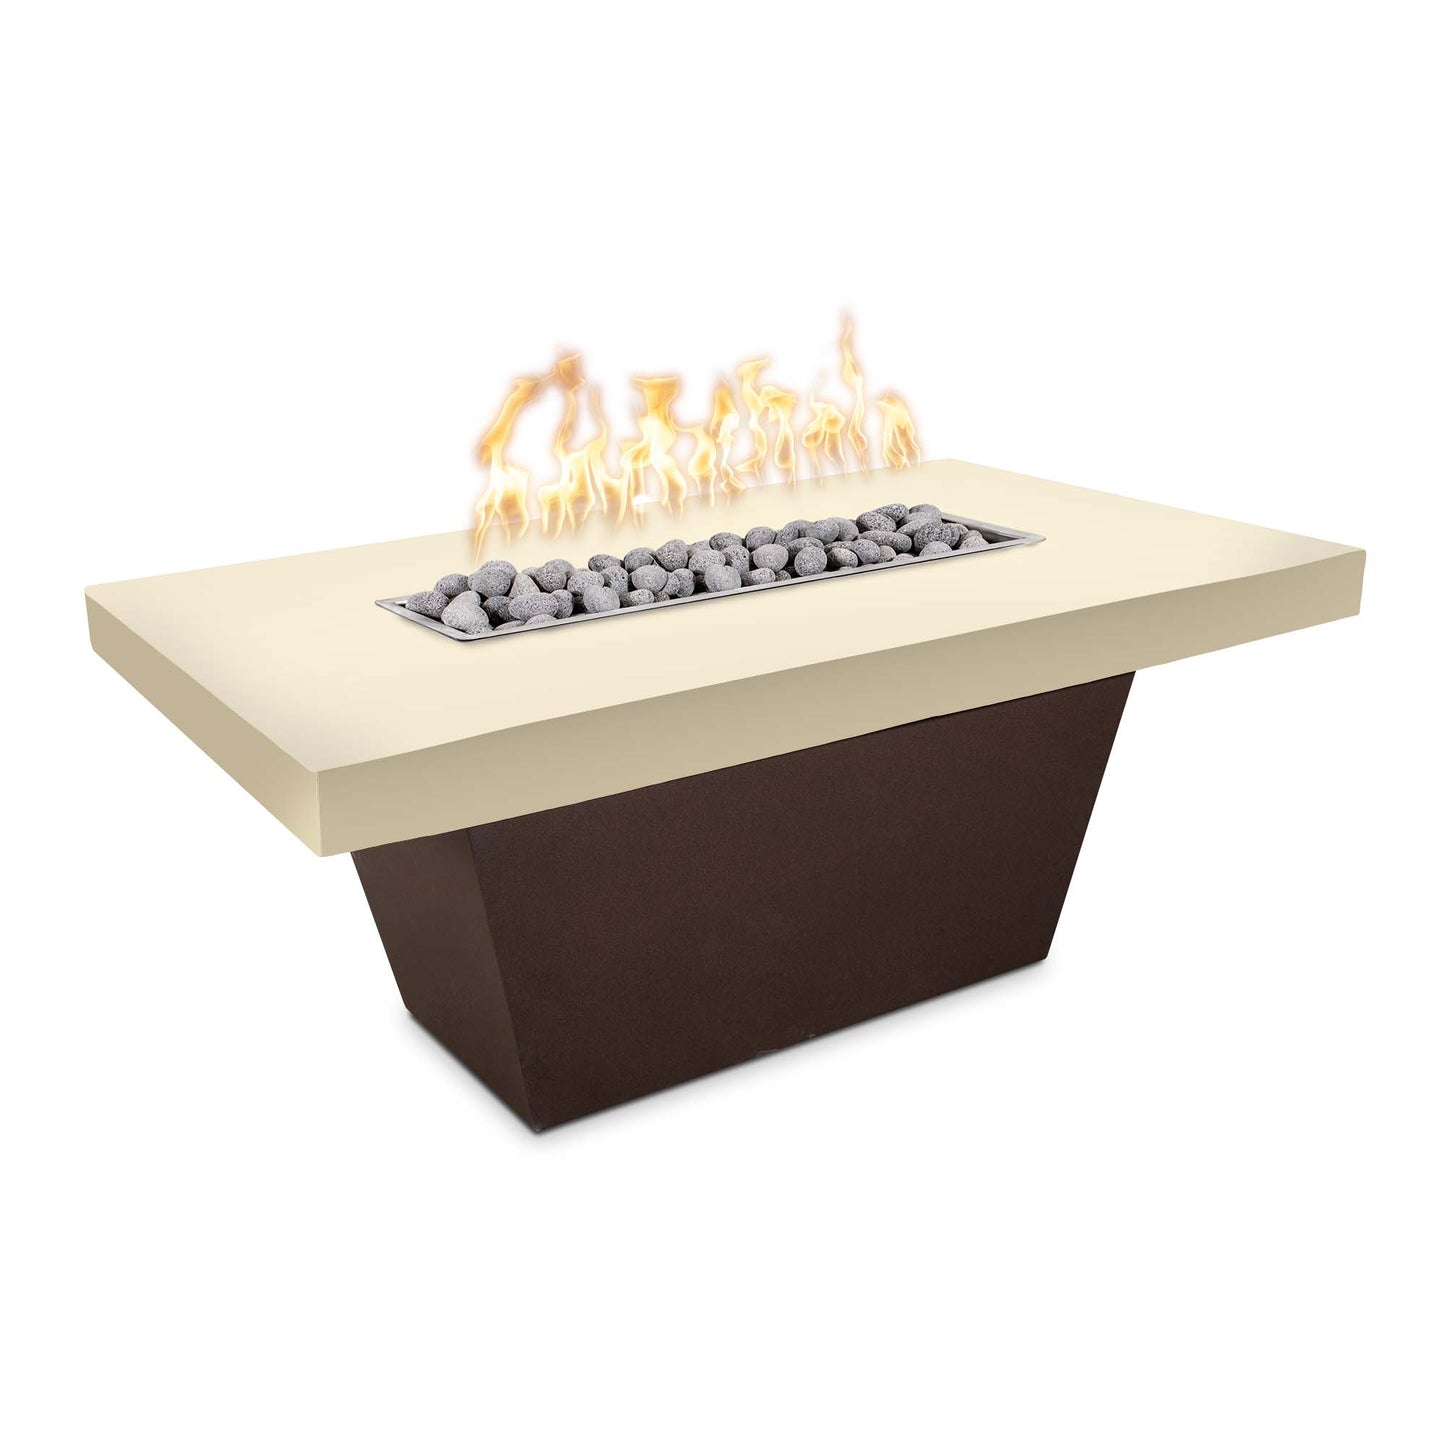 The Outdoor Plus Tacoma 48" Rustic White Concrete Top & Copper Vein Powder Coated Base Natural Gas Fire Table with Match Lit Ignition